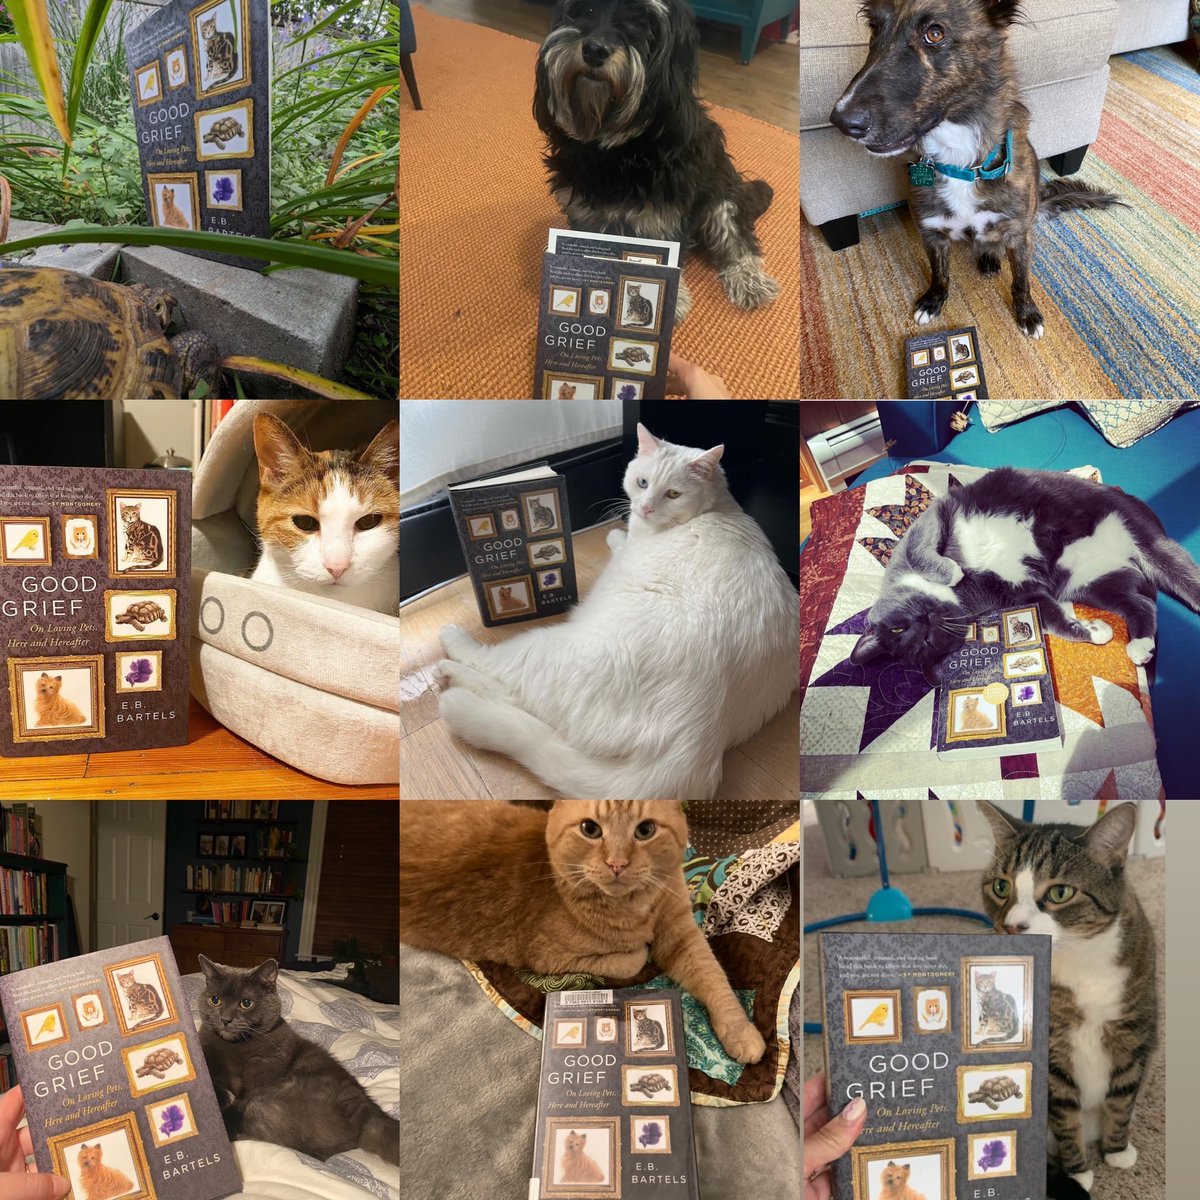 this week marks ONE WHOLE YEAR of #goodgriefpetsbook! thank you to all the very patient pets who posed with copies of my book. you are the true heroes.